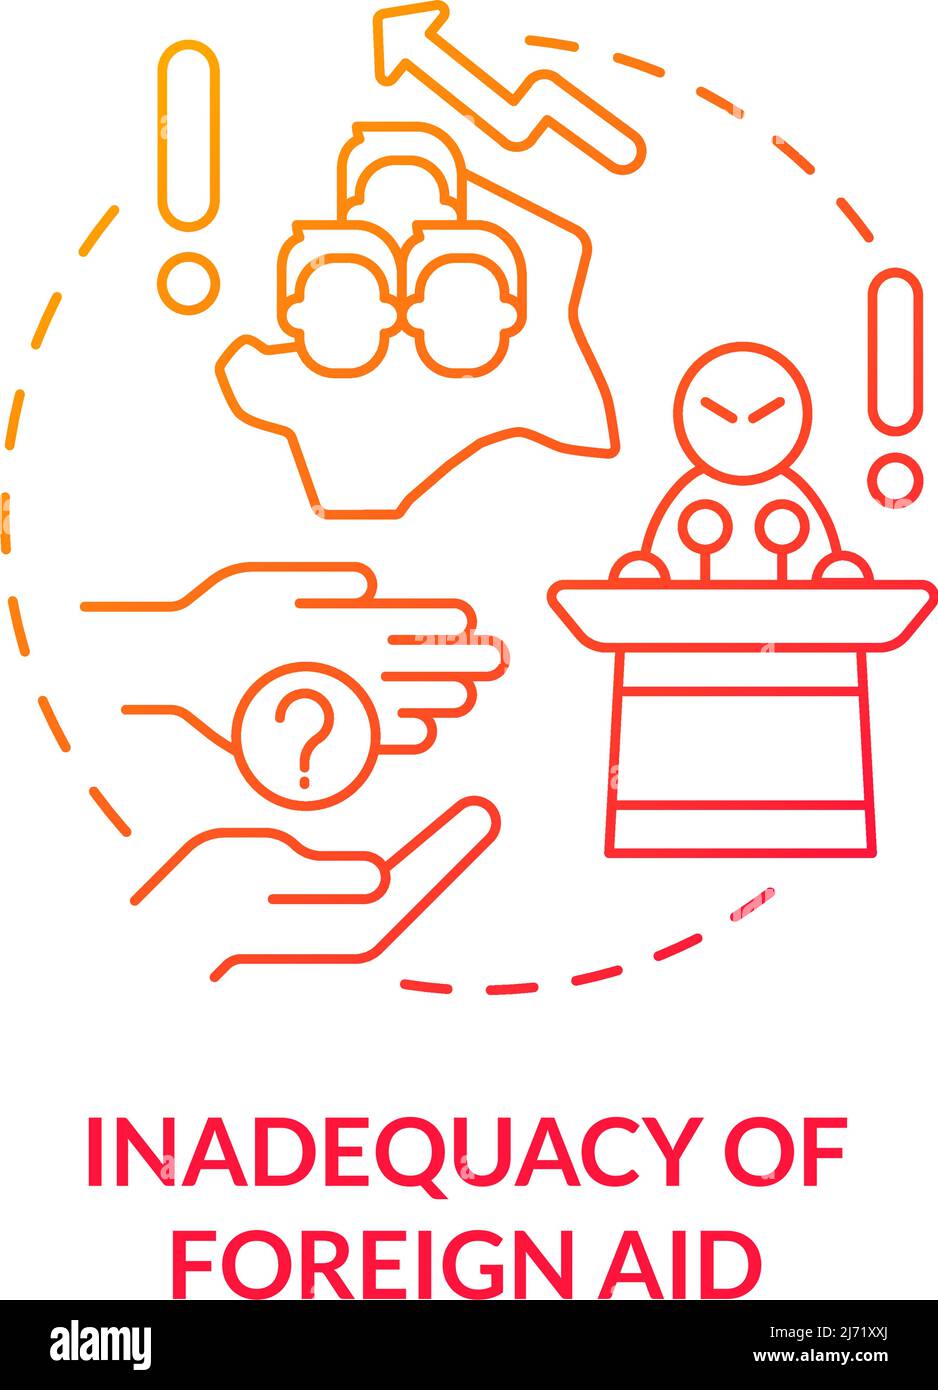 Inadequacy of foreign aid red gradient concept icon Stock Vector